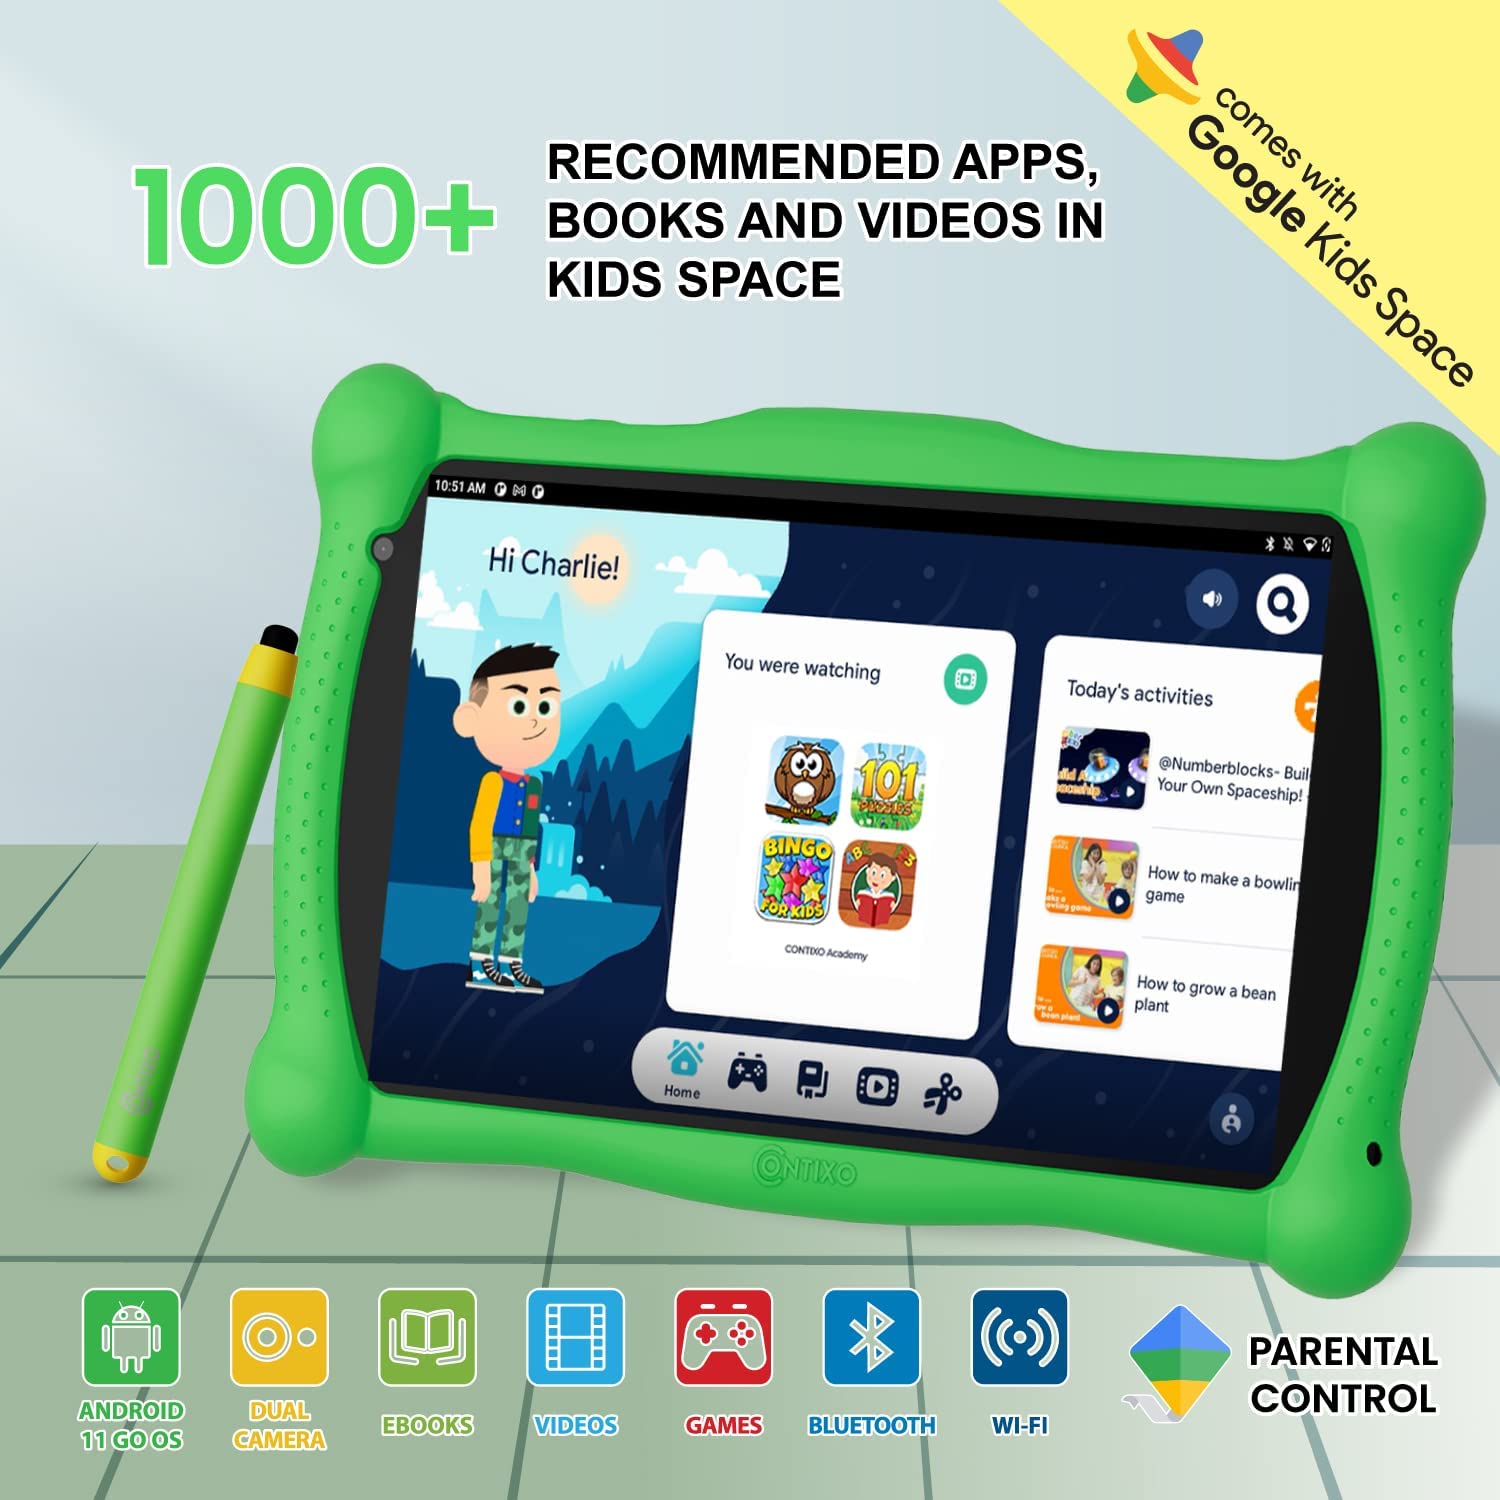 Contixo 7" Kids Learning Tablet HD Touch Screen, WiFi, Android 11, 2GB RAM, 32GB ROM, Protective Case with Kickstand, Age 3-9, V8-3-ST Green - image 2 of 8